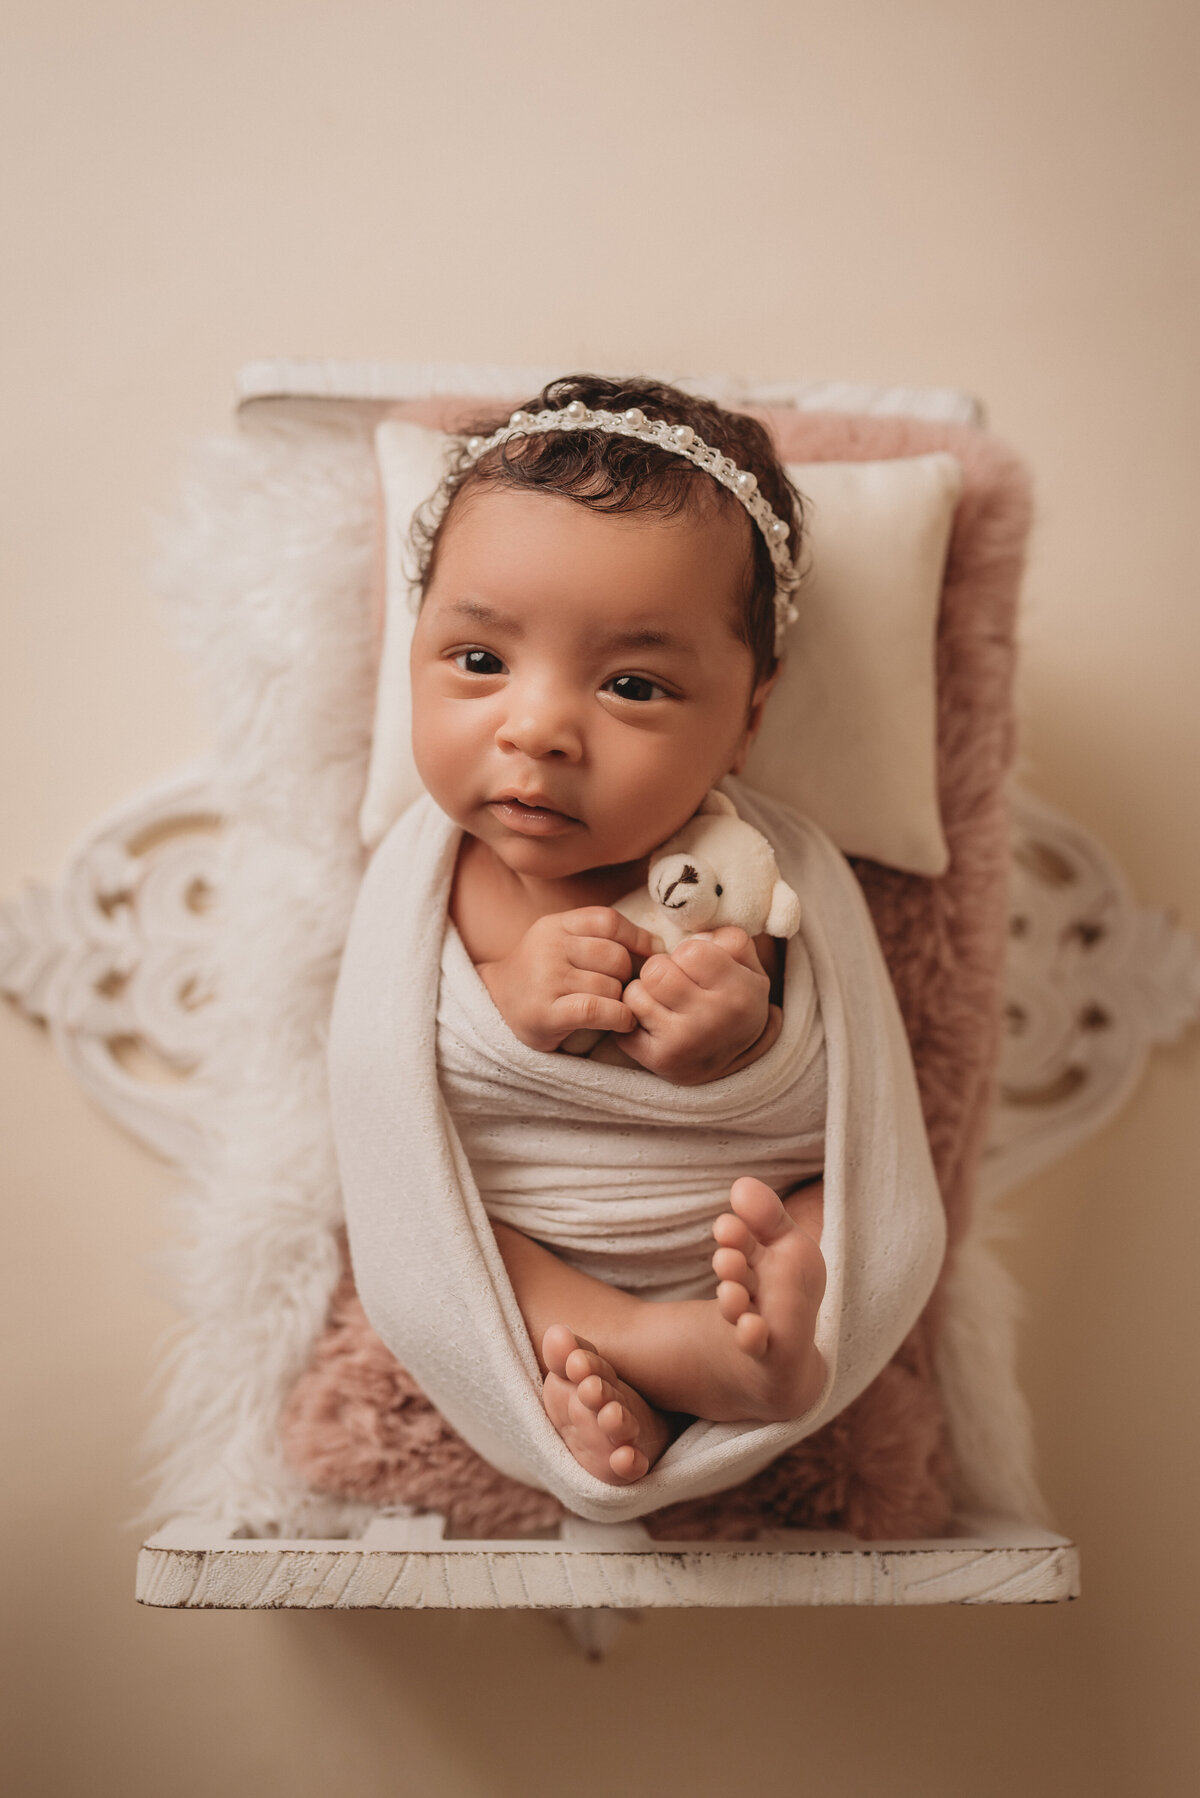 Newborn photography portrait session with baby girl wrapped in cream fabric with fingers and toes showing, laying in tiny white bed holding a teddy bear and looking at the camera